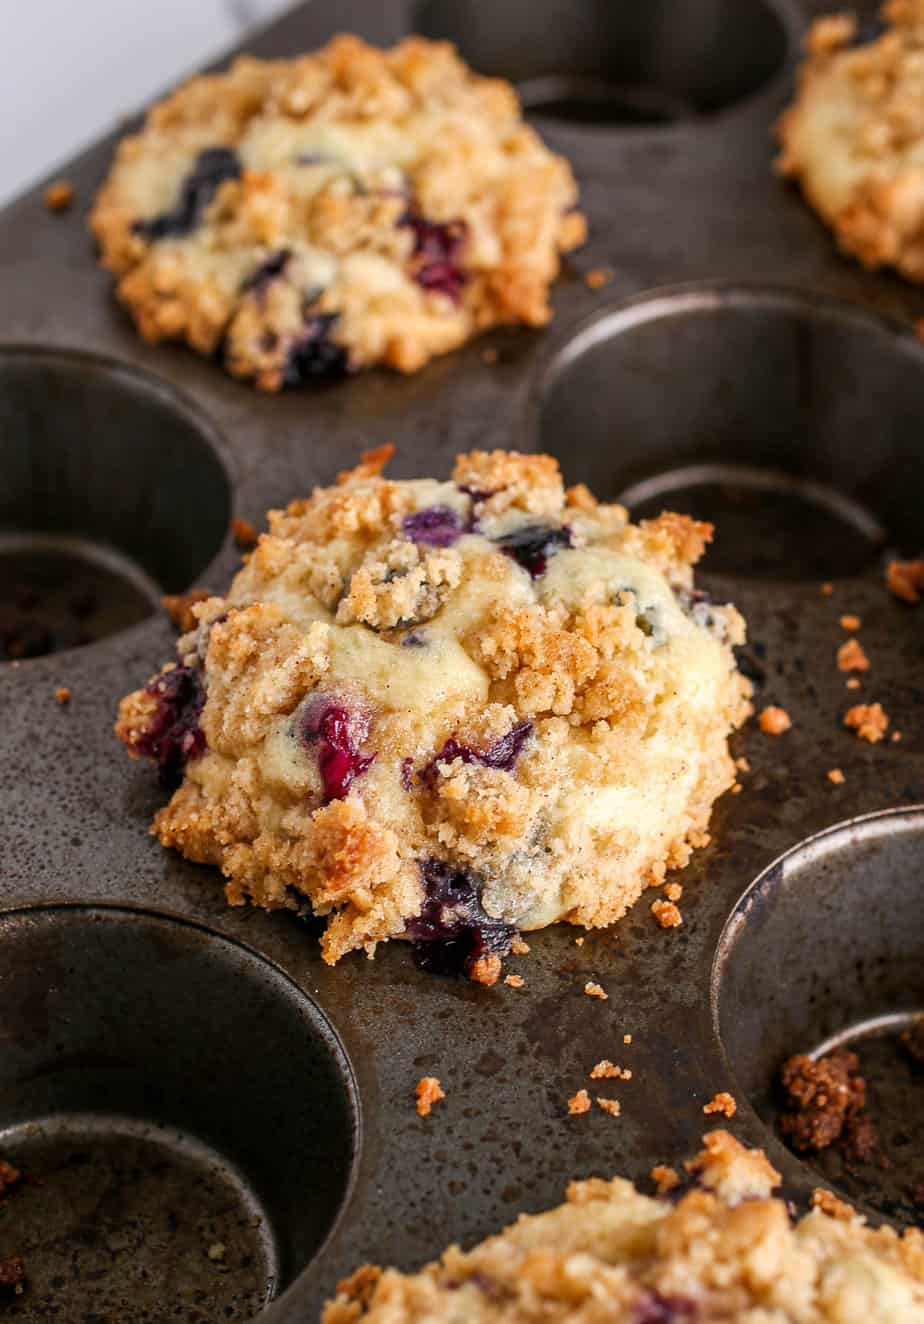 Blueberry Muffins With Crumb Topping baked in muffin pan.